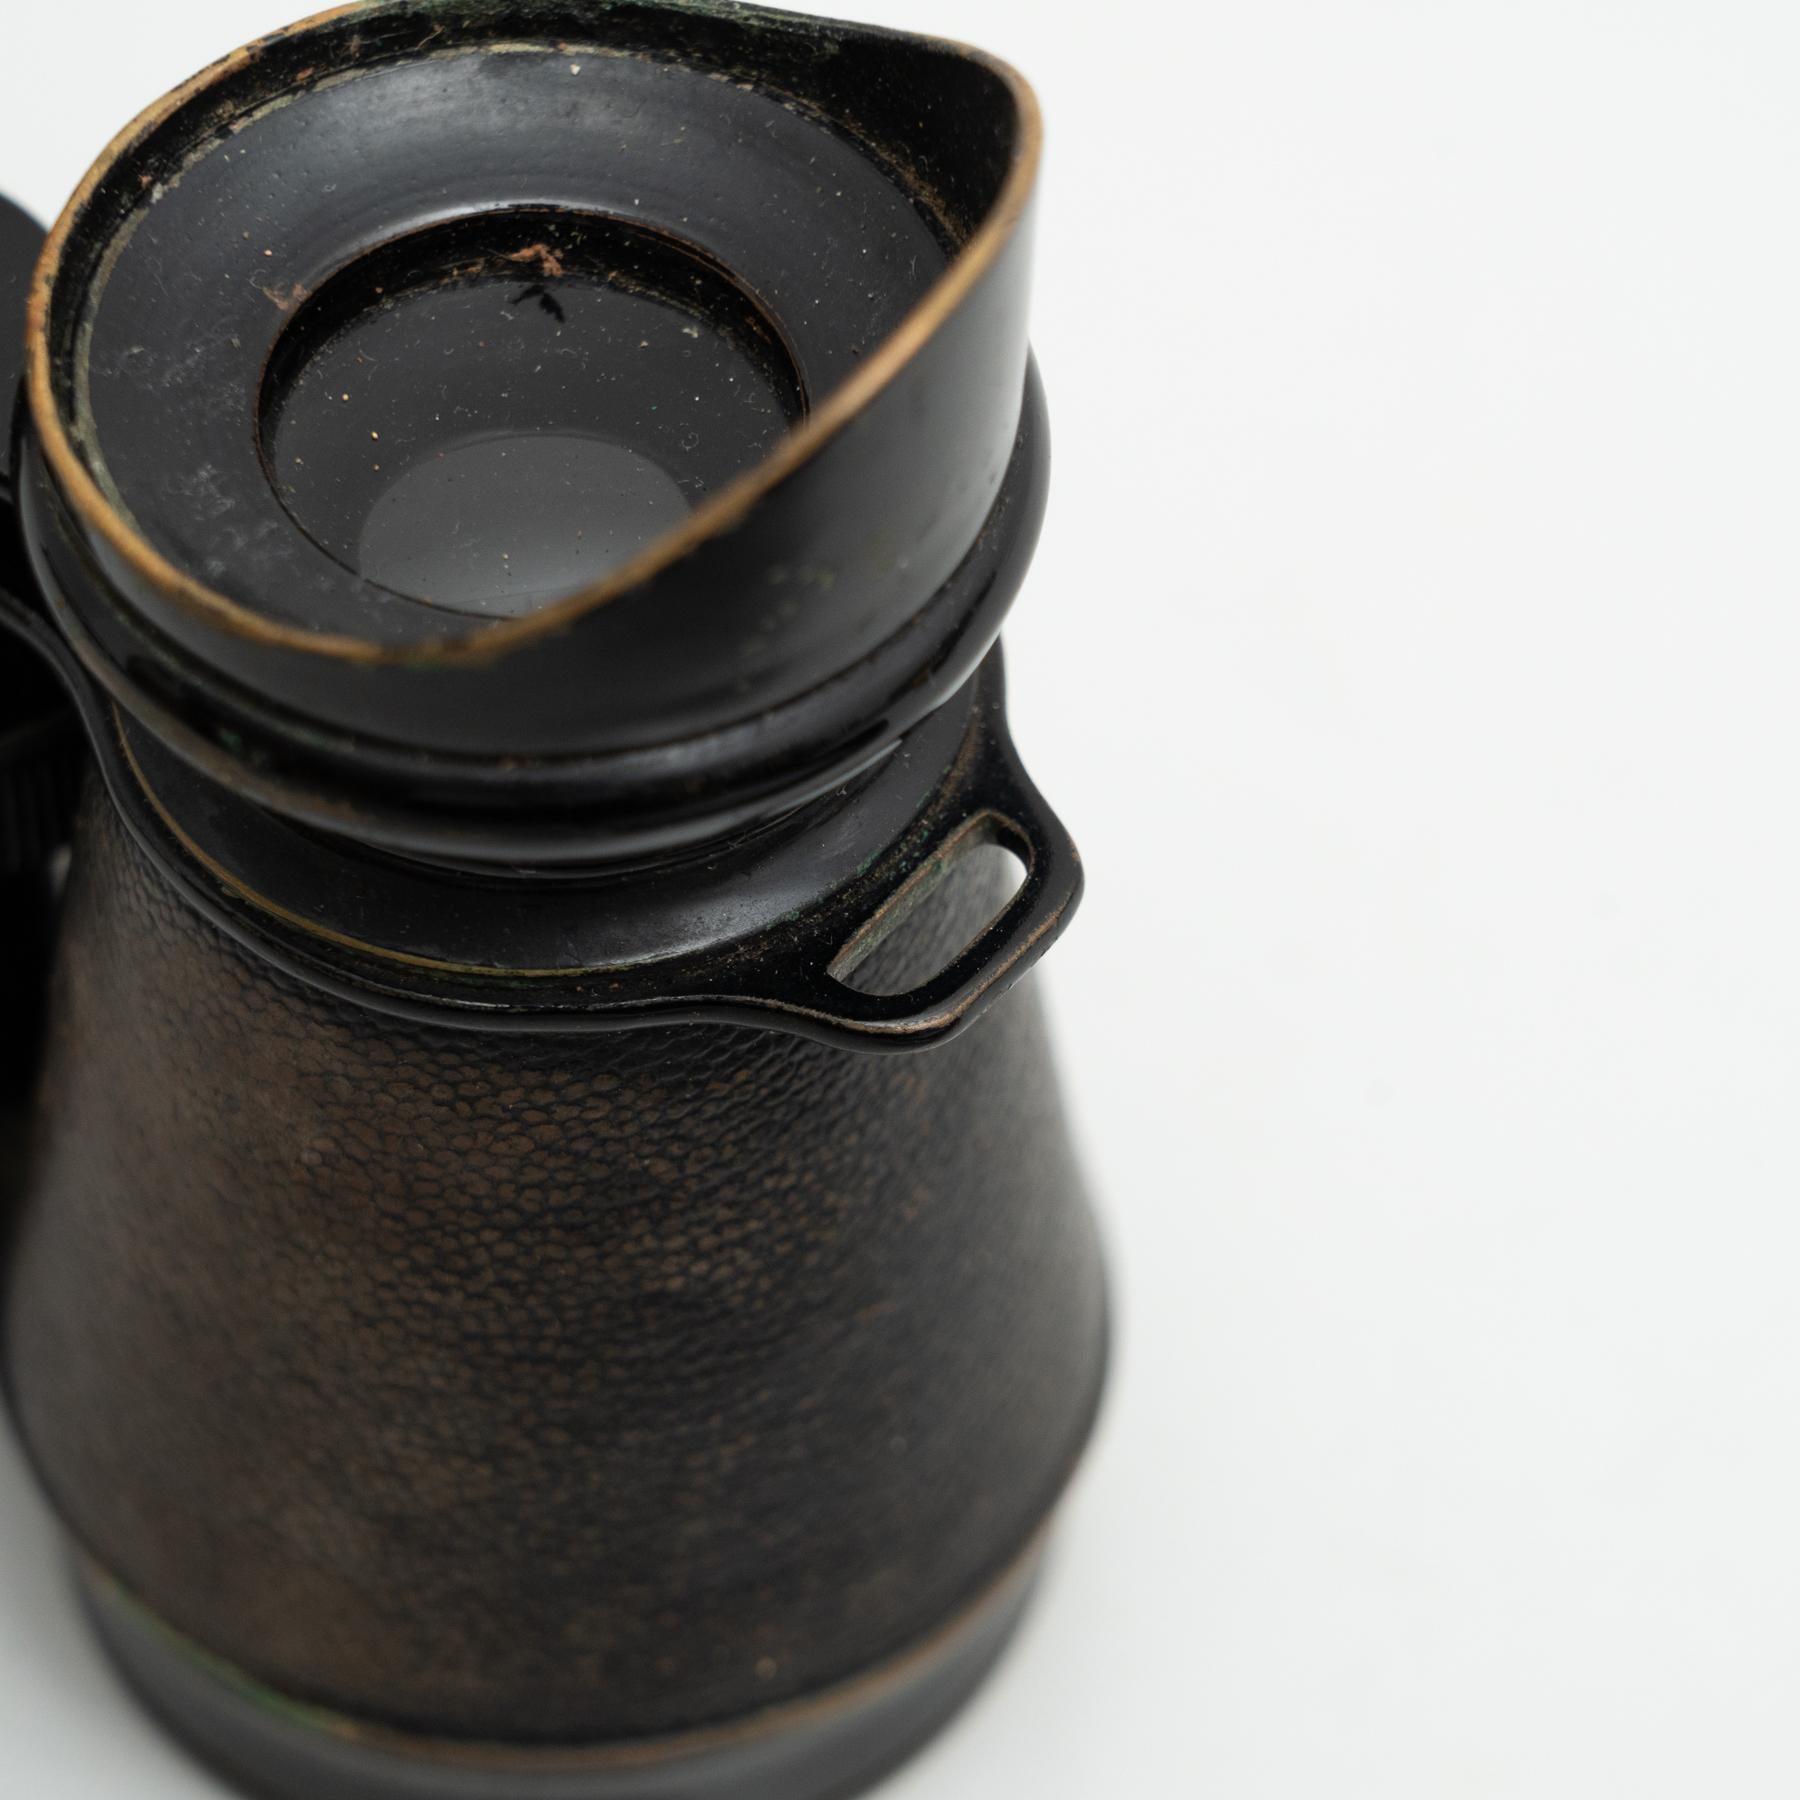 Antique Vintage Binoculars on a Leather Case, circa 1950 For Sale 4